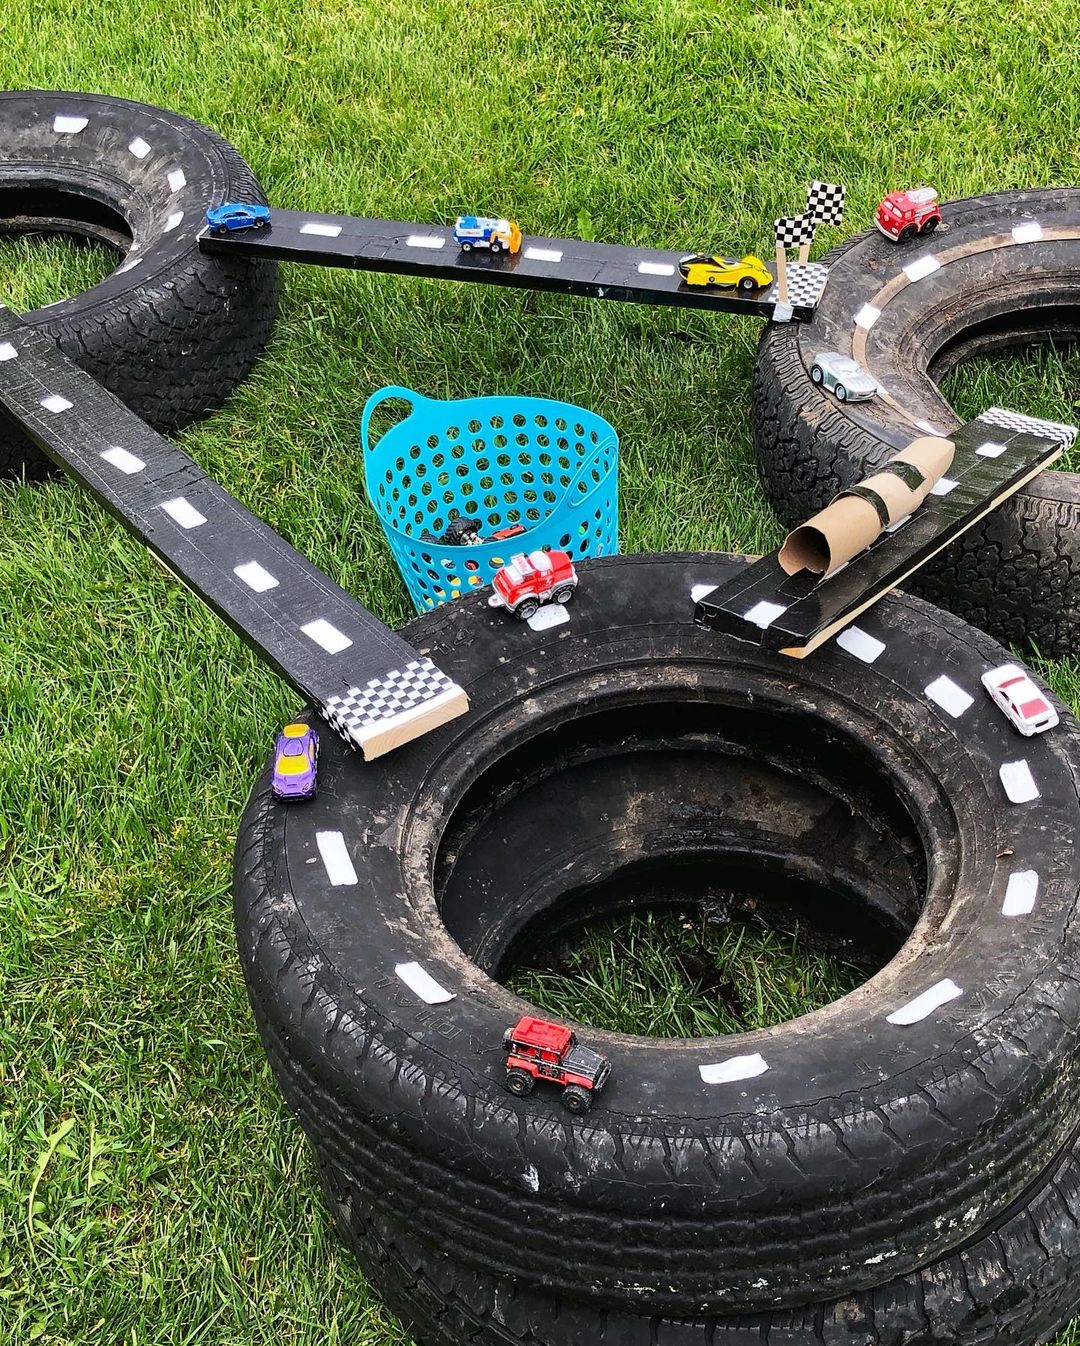 DIY racetrack with old tires, wood planks, and toy cars. Photo by Instagram user @goldendaysdayhome